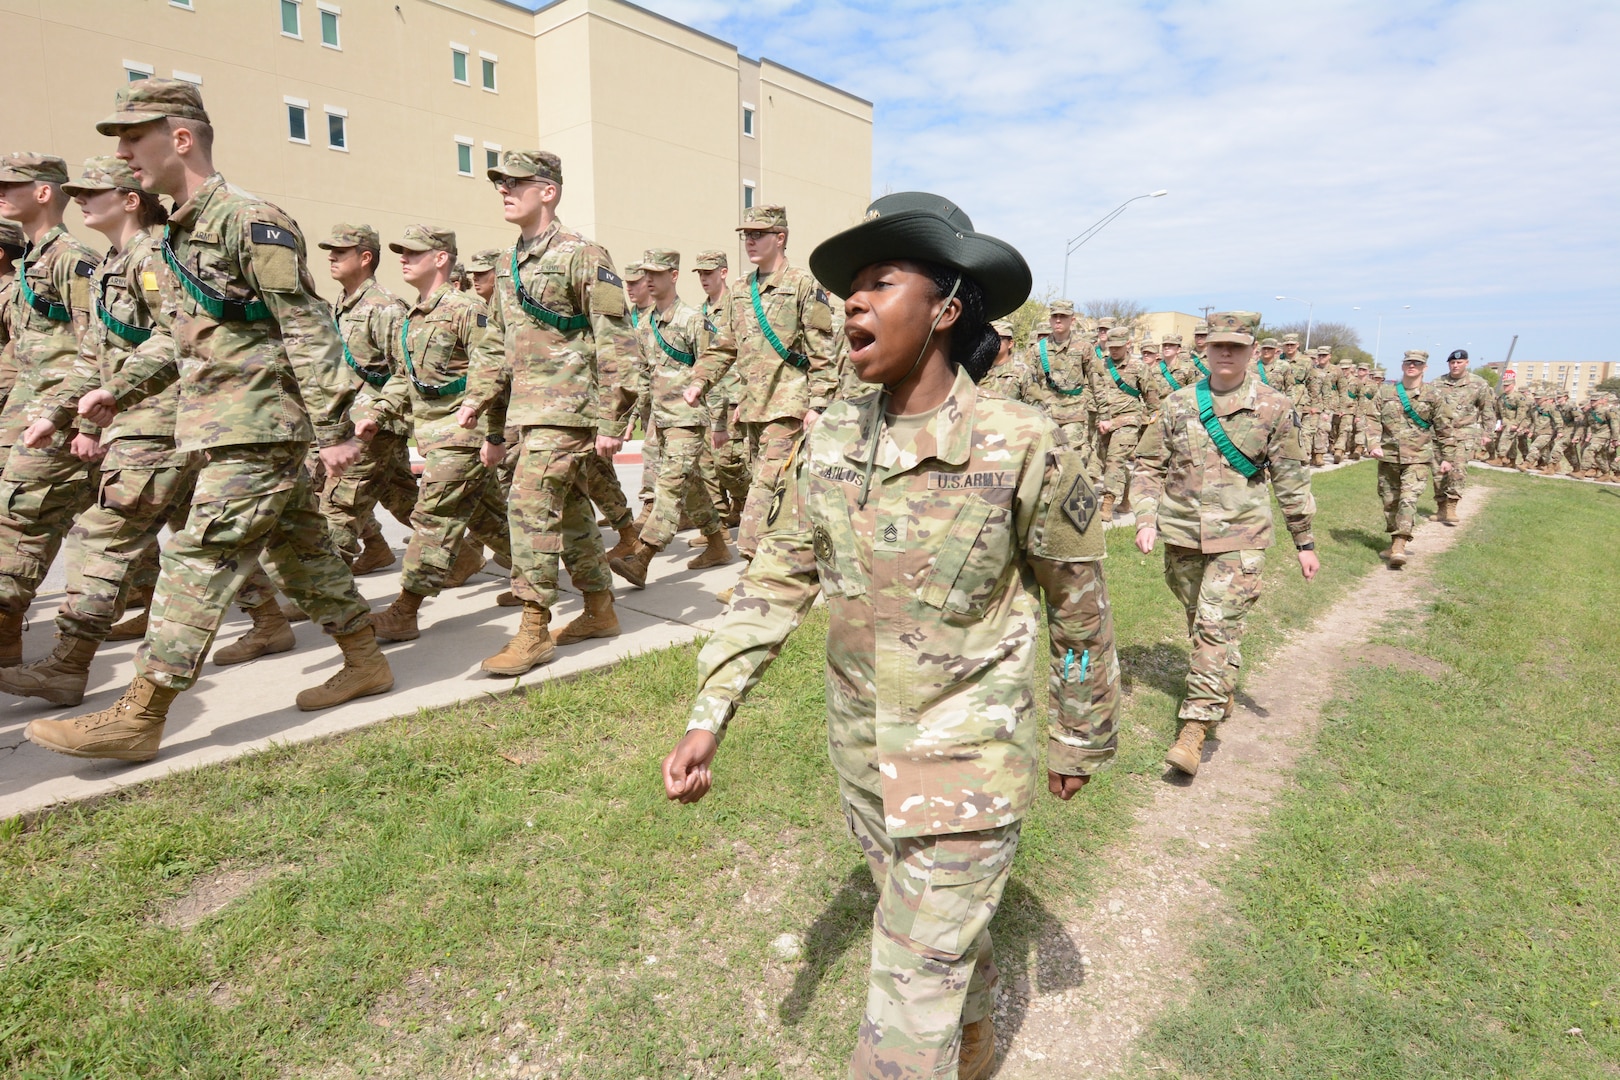 Sgt. 1st Class Magalie Atilus, Delta Company, 232d Medical Battalion, marches with Advanced Individual Training Soldiers at Joint Base San Antonio-Fort Sam Houston, Texas. Atilus recently graduated from the Drill Sergeant Conversion Course at Fort Jackson, SC.